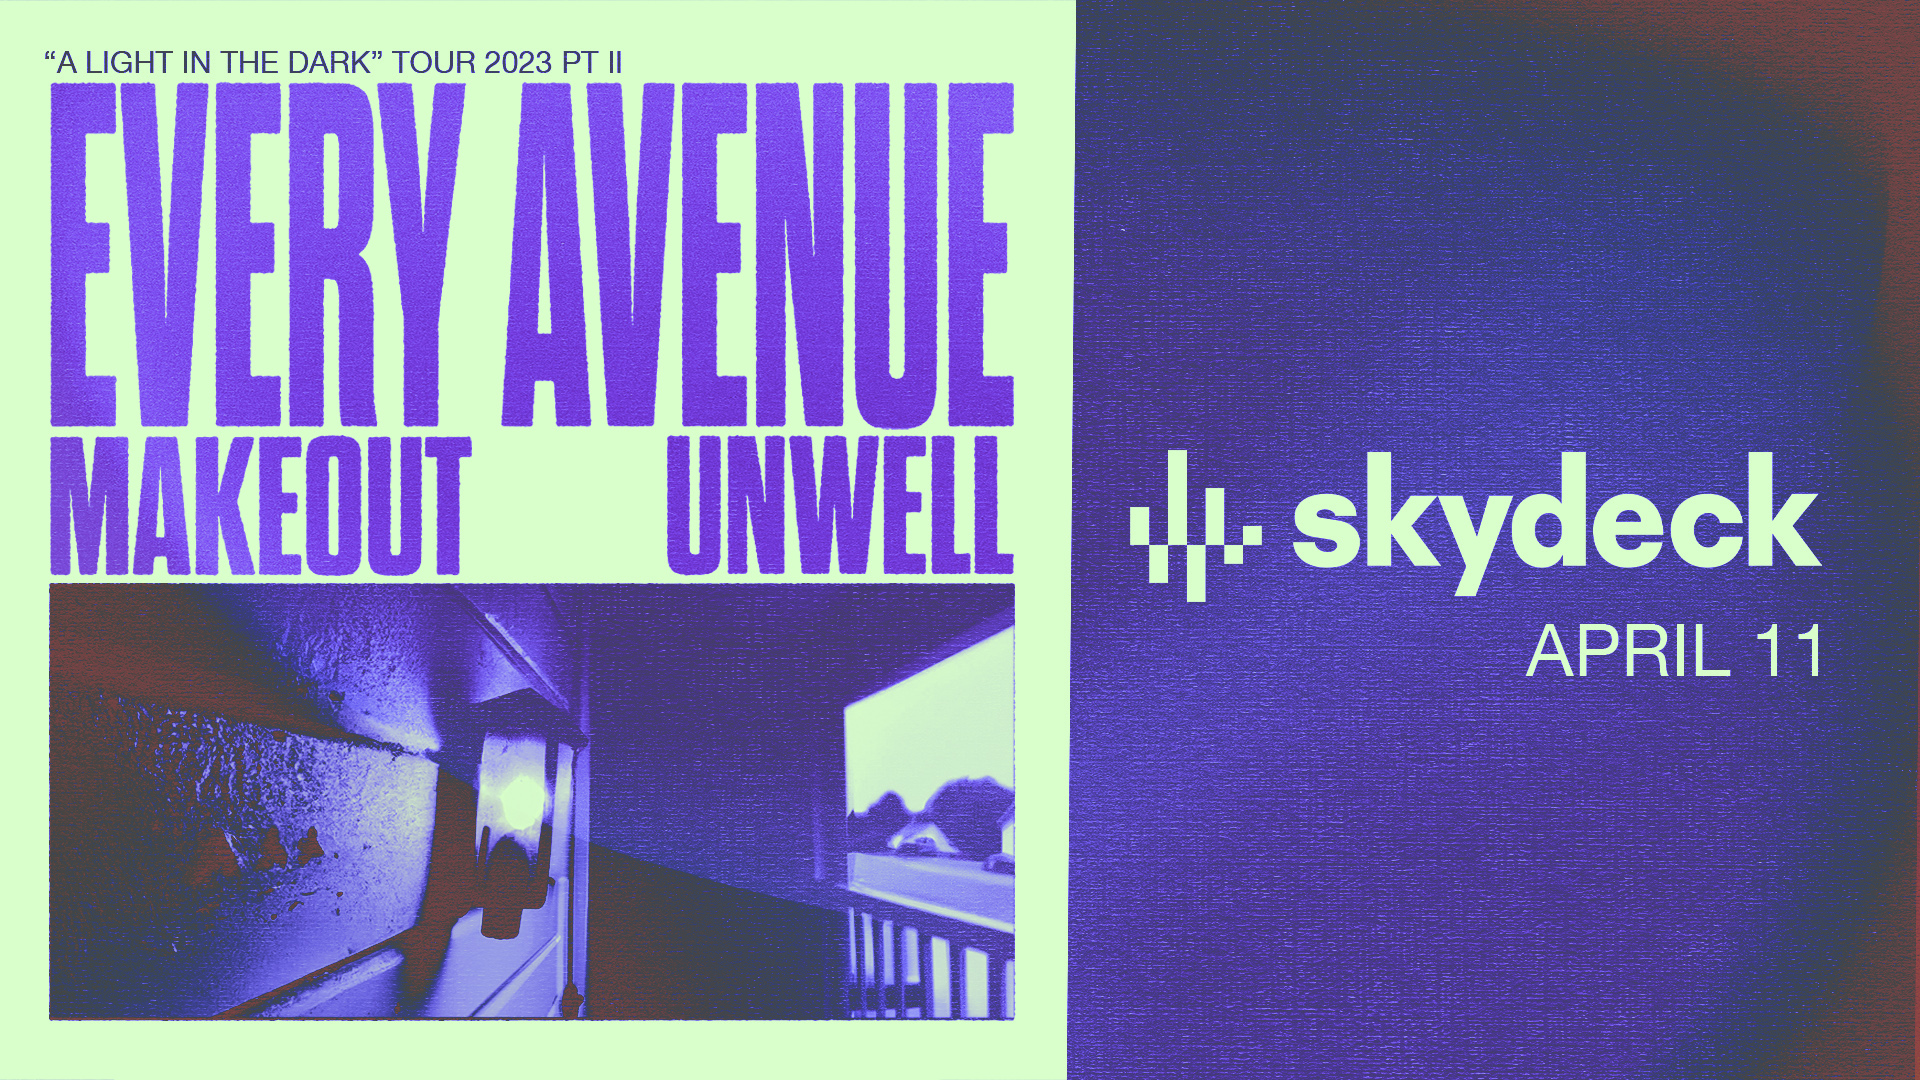 Promo image of Every Avenue on Skydeck